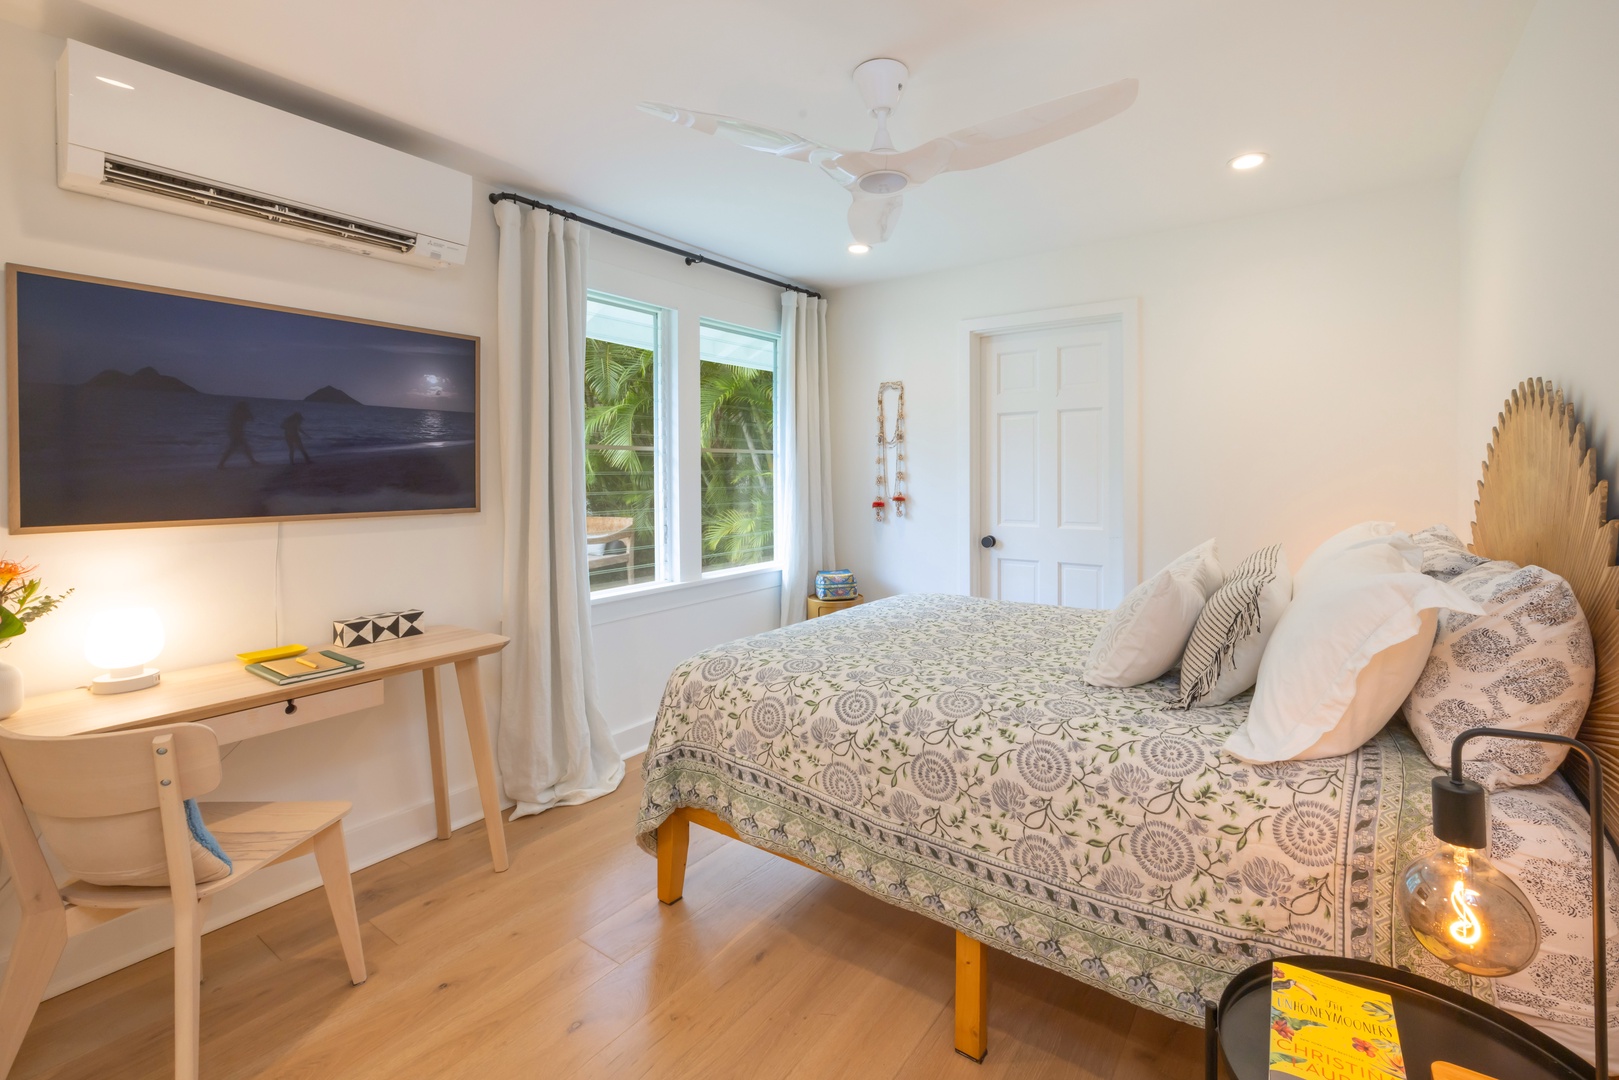 Kailua Vacation Rentals, Lanikai Ola Nani - With wide windows, smart TV and split-type AC, all for comfort and convenience.